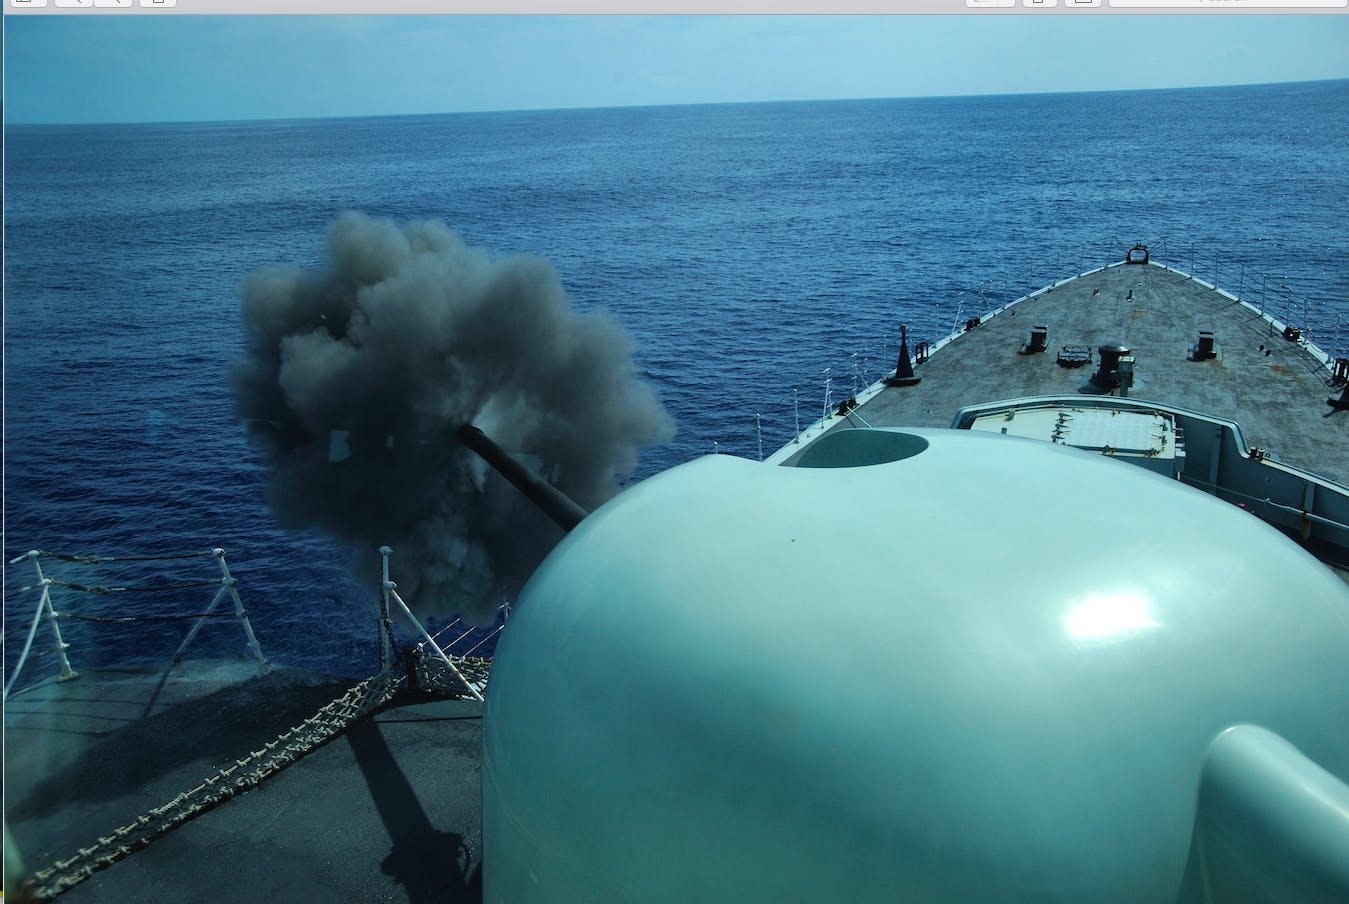 Guns from Iroquois-class destroyers up for sale